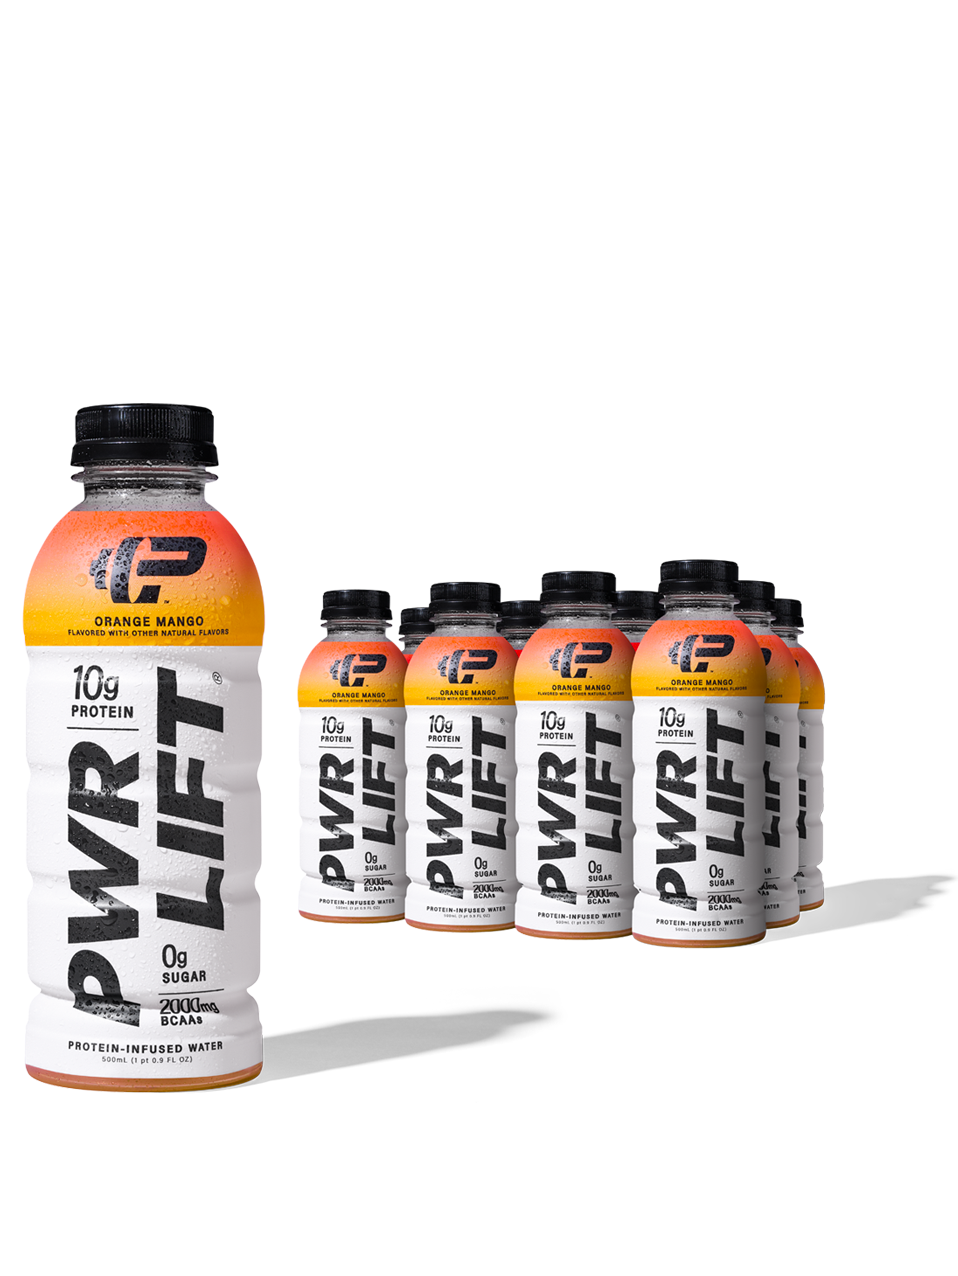 A bottle of PWR LIFT Orange Mango in the forefront with rows of the same in the background